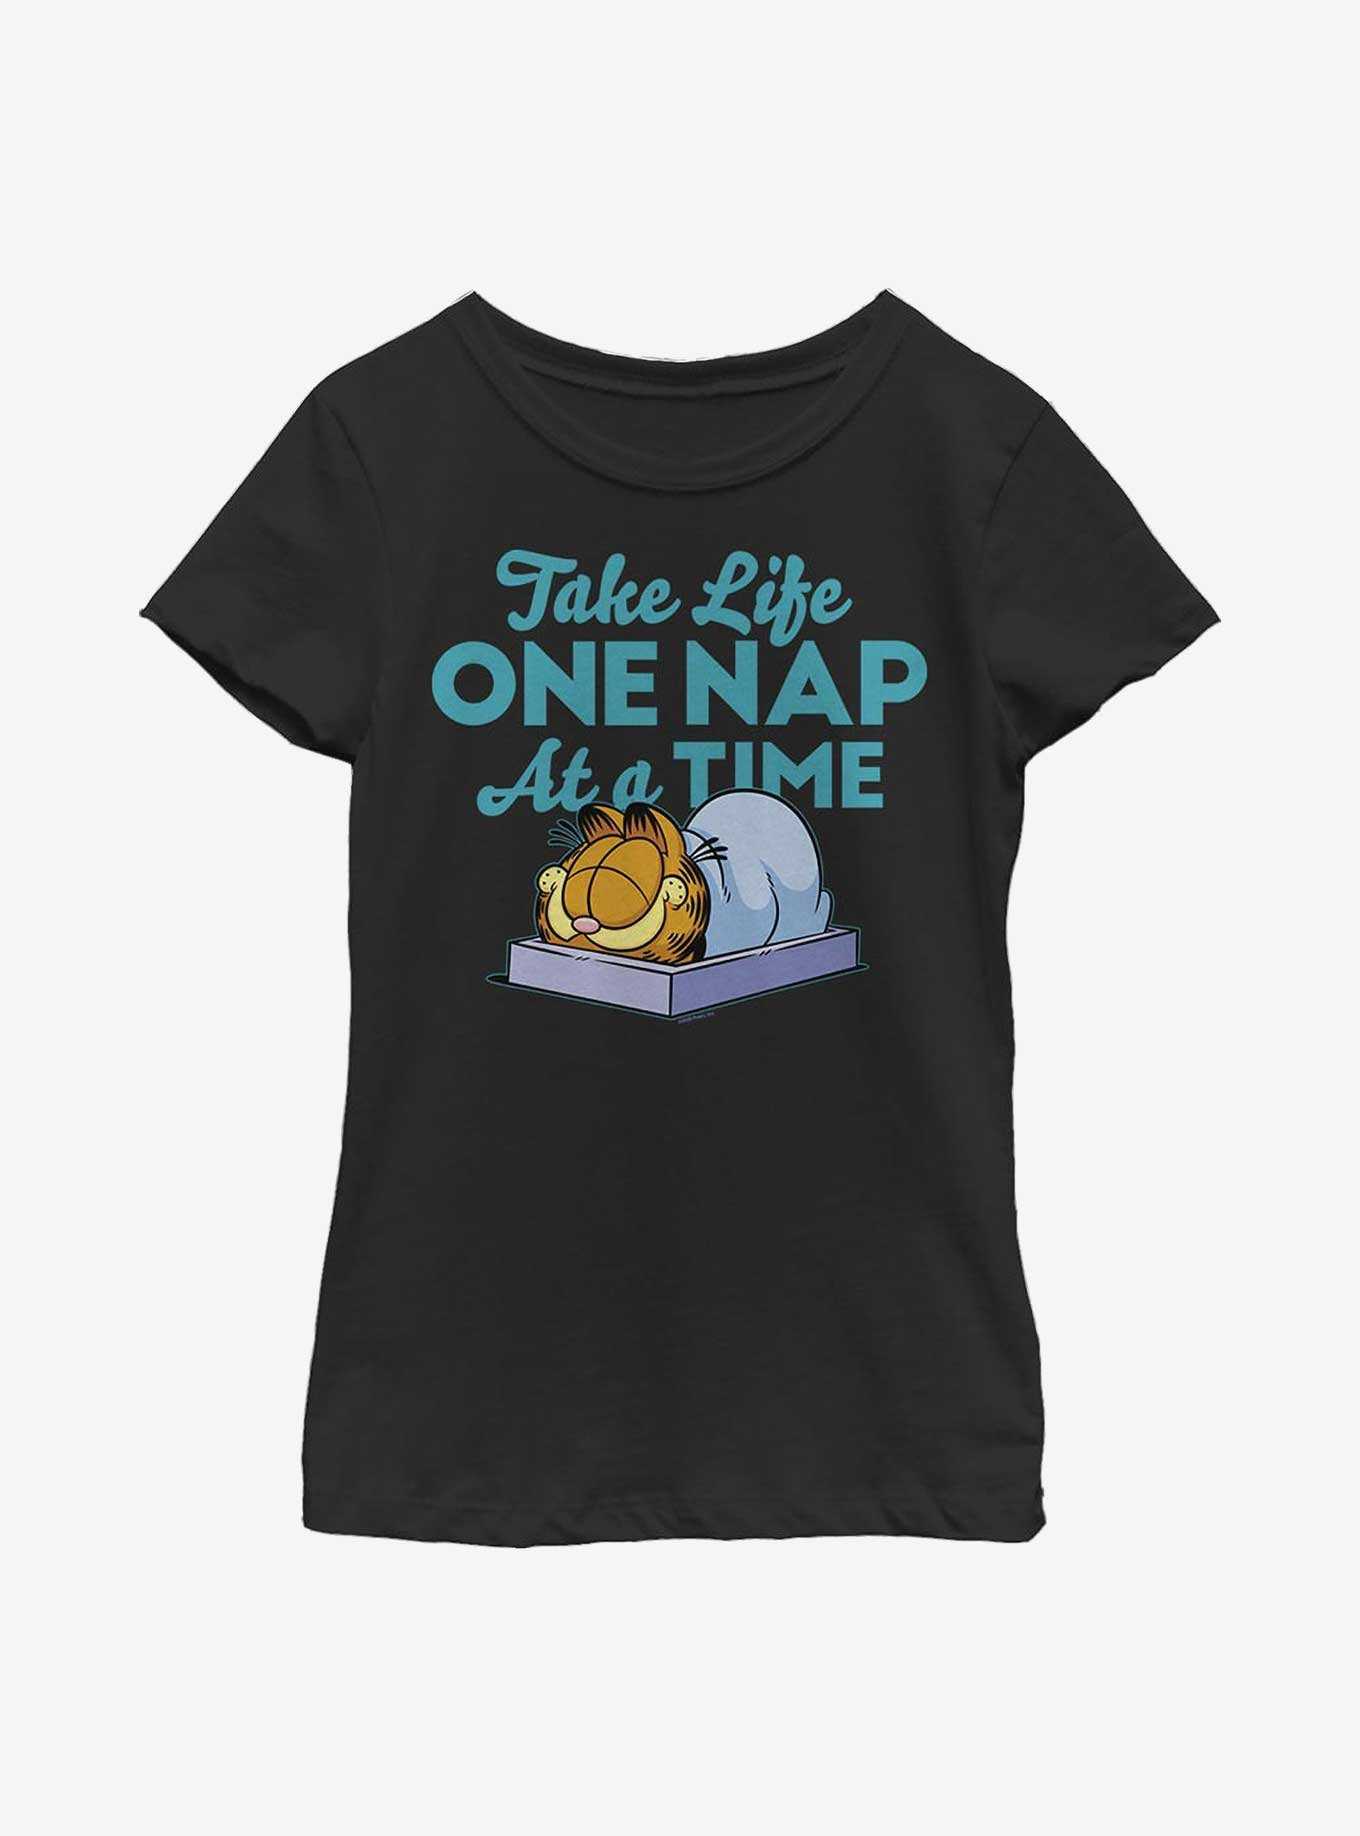 Garfield One Nap At A Time Youth Girl's T-Shirt, , hi-res